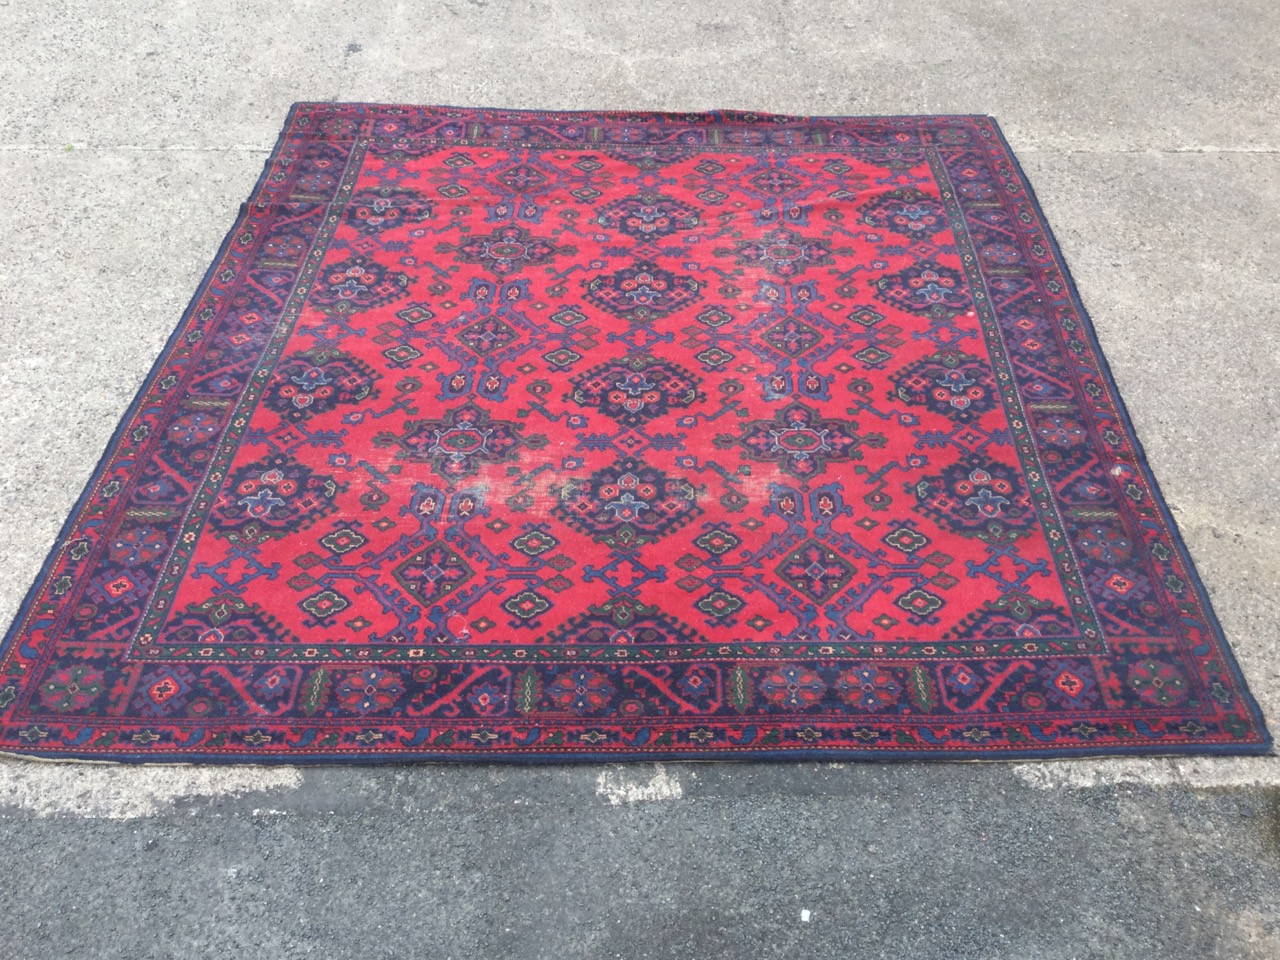 A Turkish carpet woven in the traditional green & blue palette on red ground - some wear. (124in x